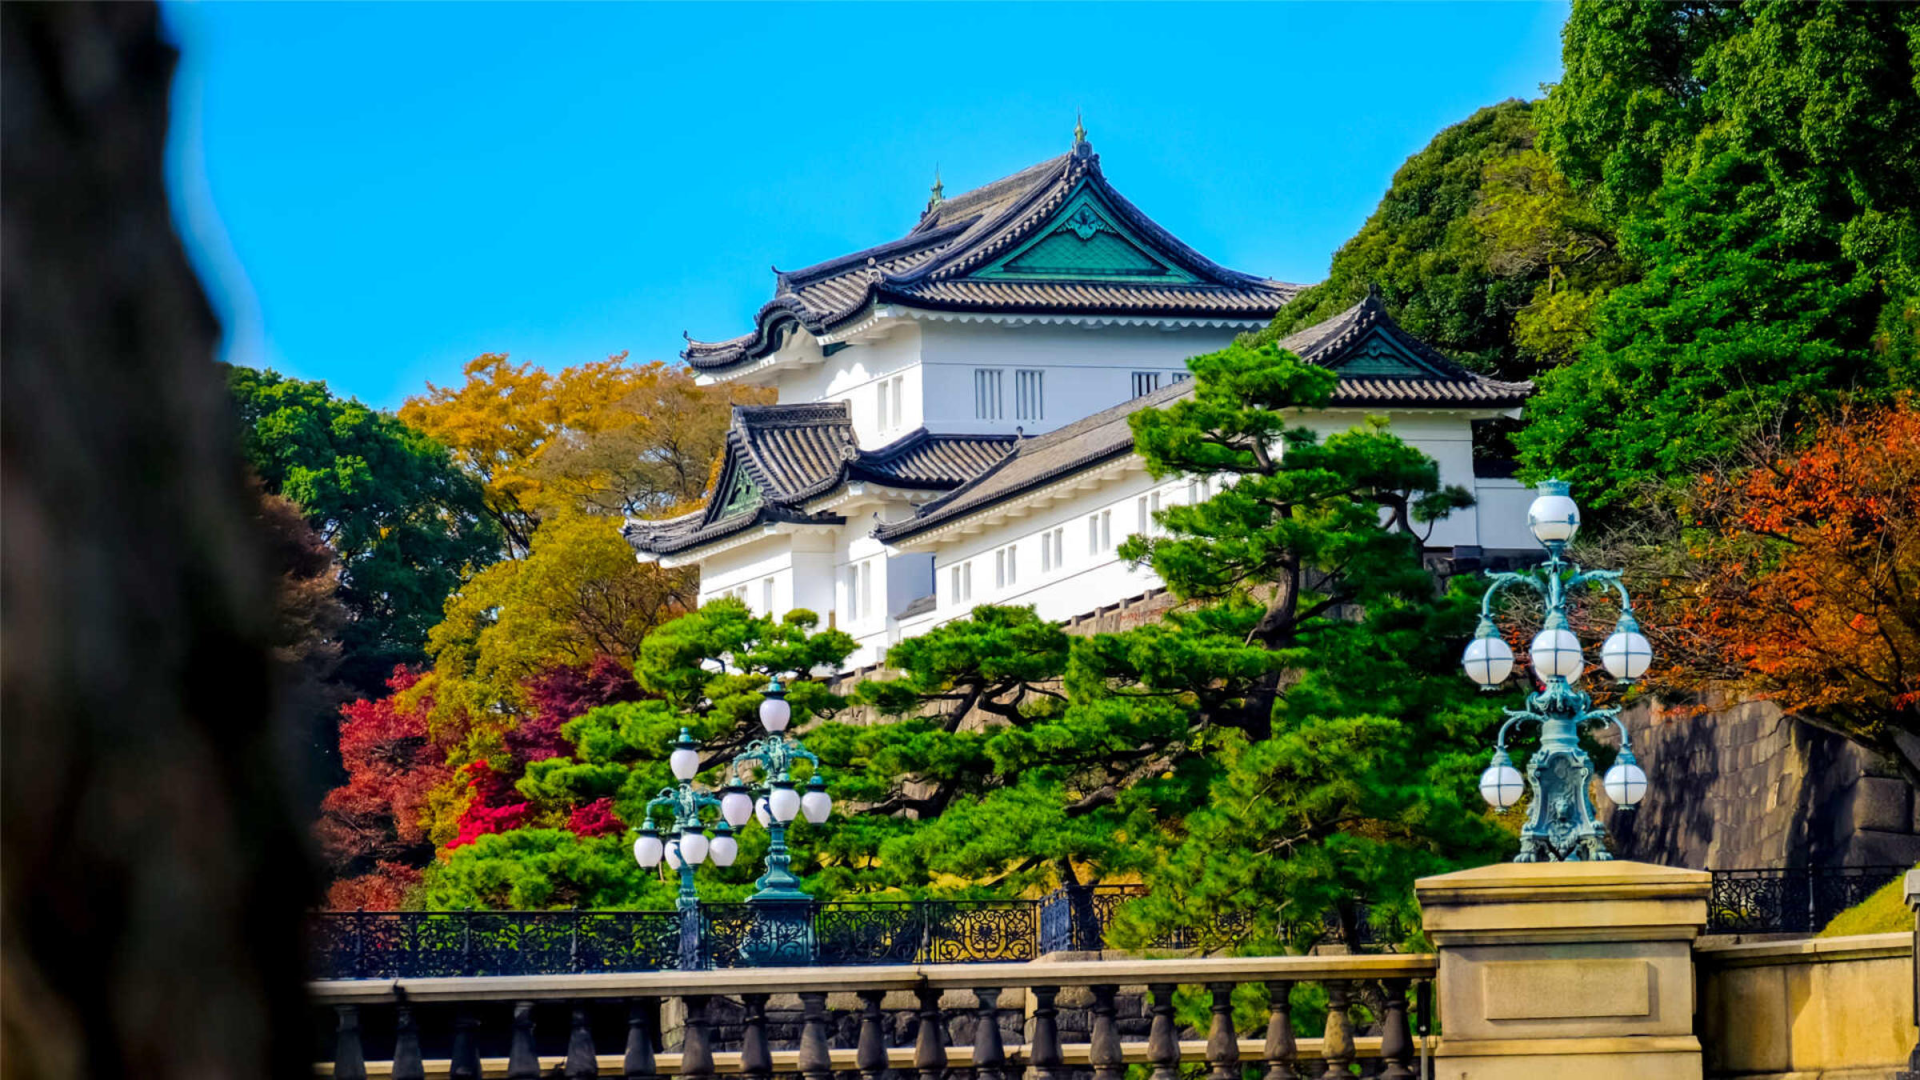 Visit the Imperial Palace.